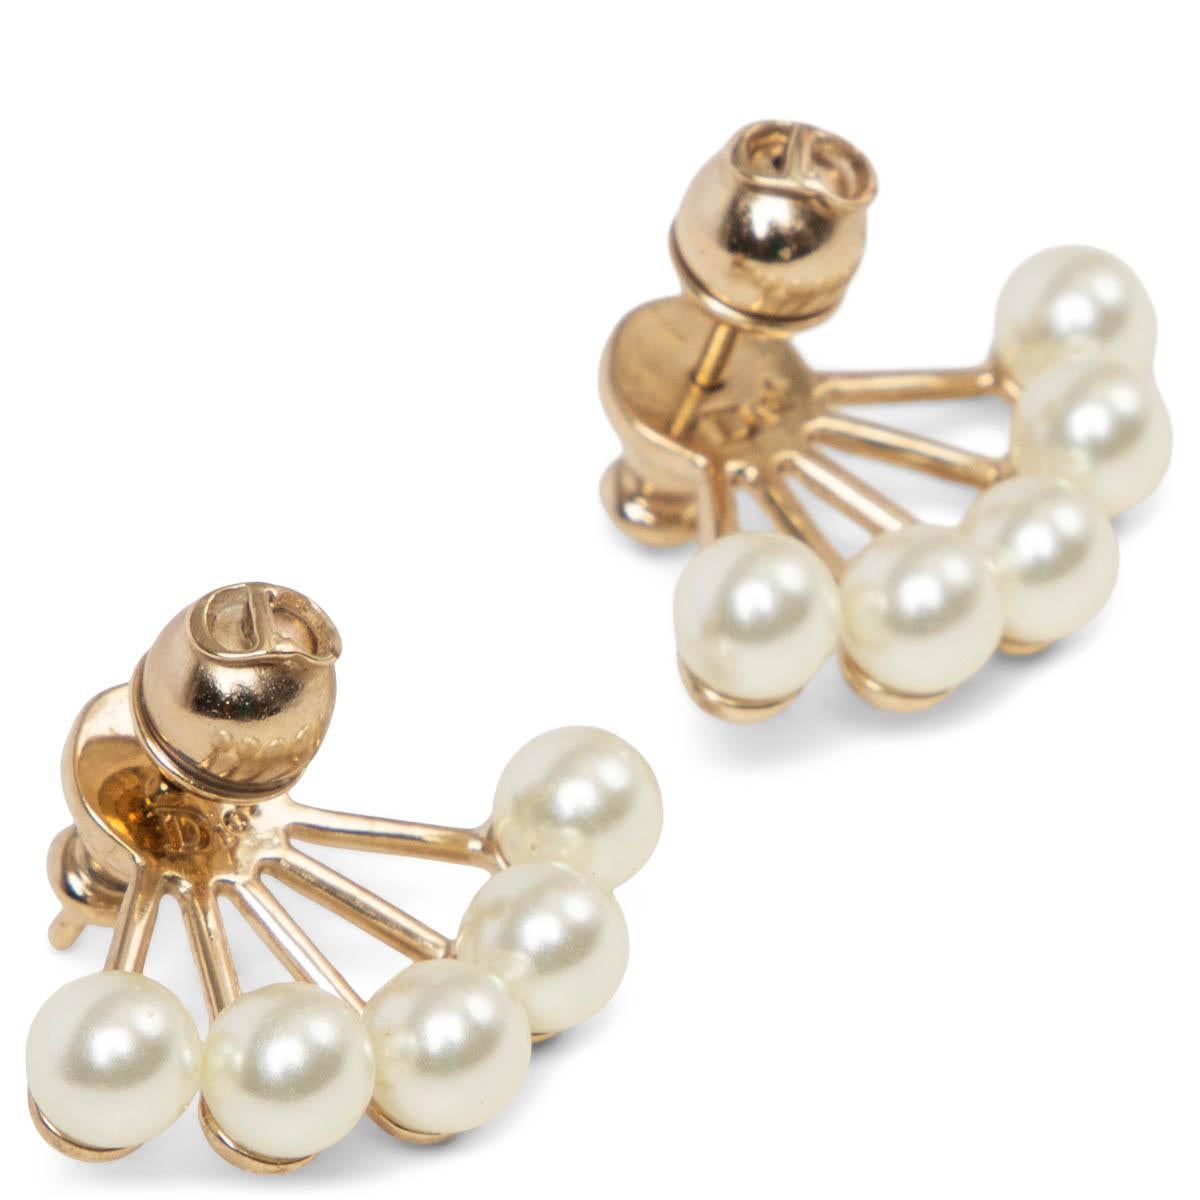 100% authentic Christian Dior 'La Petite Tribale' stud earrings in gold-tone metal with faux pearls. Have been worn and are in excellent condition.

Measurements
Width	2.5cm (1in)
Height	0.7cm (0.3in)

All our listings include only the listed item